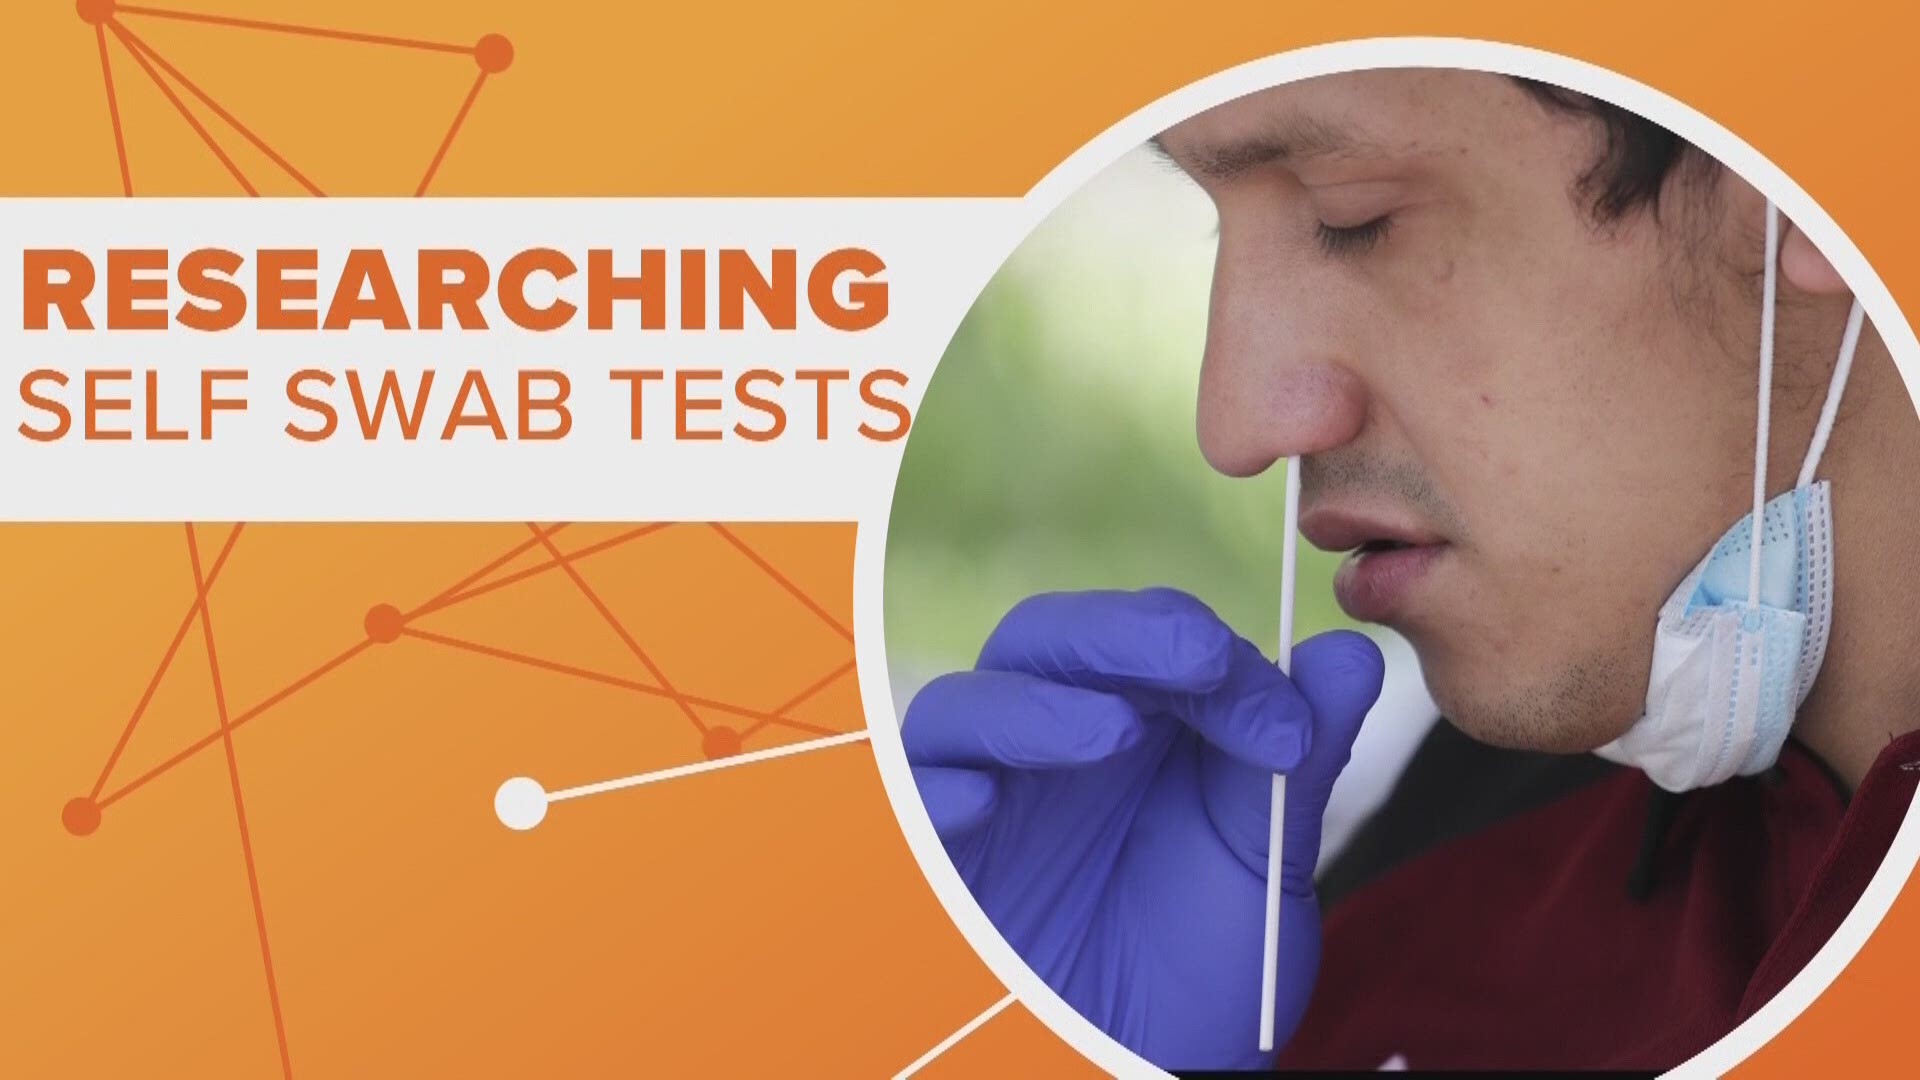 It turns out self-swab coronavirus tests can be very reliable, but you must follow the instructions carefully.